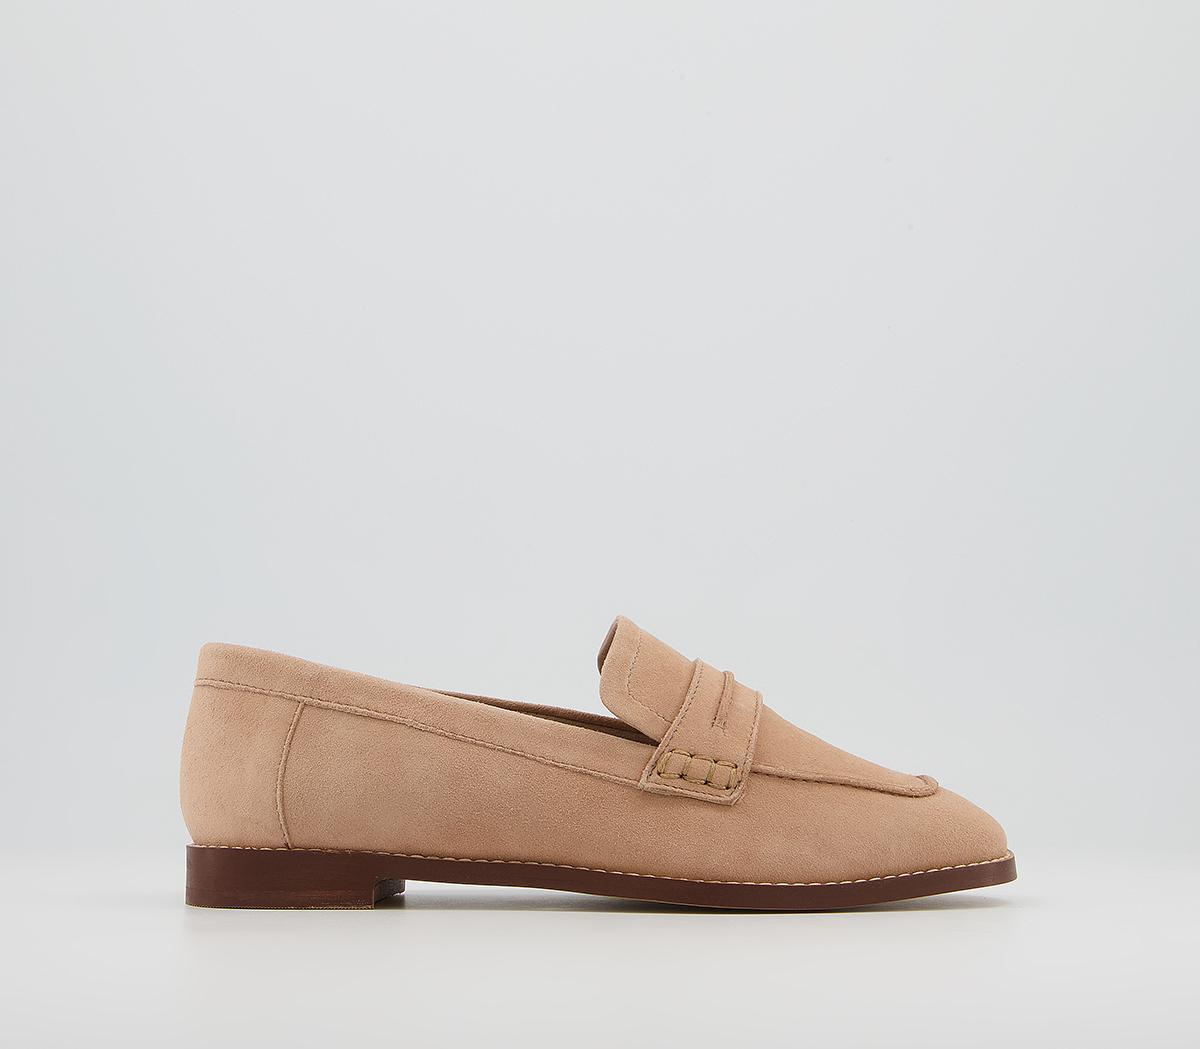 OFFICEFreetown Soft Square Toe LoafersBeige